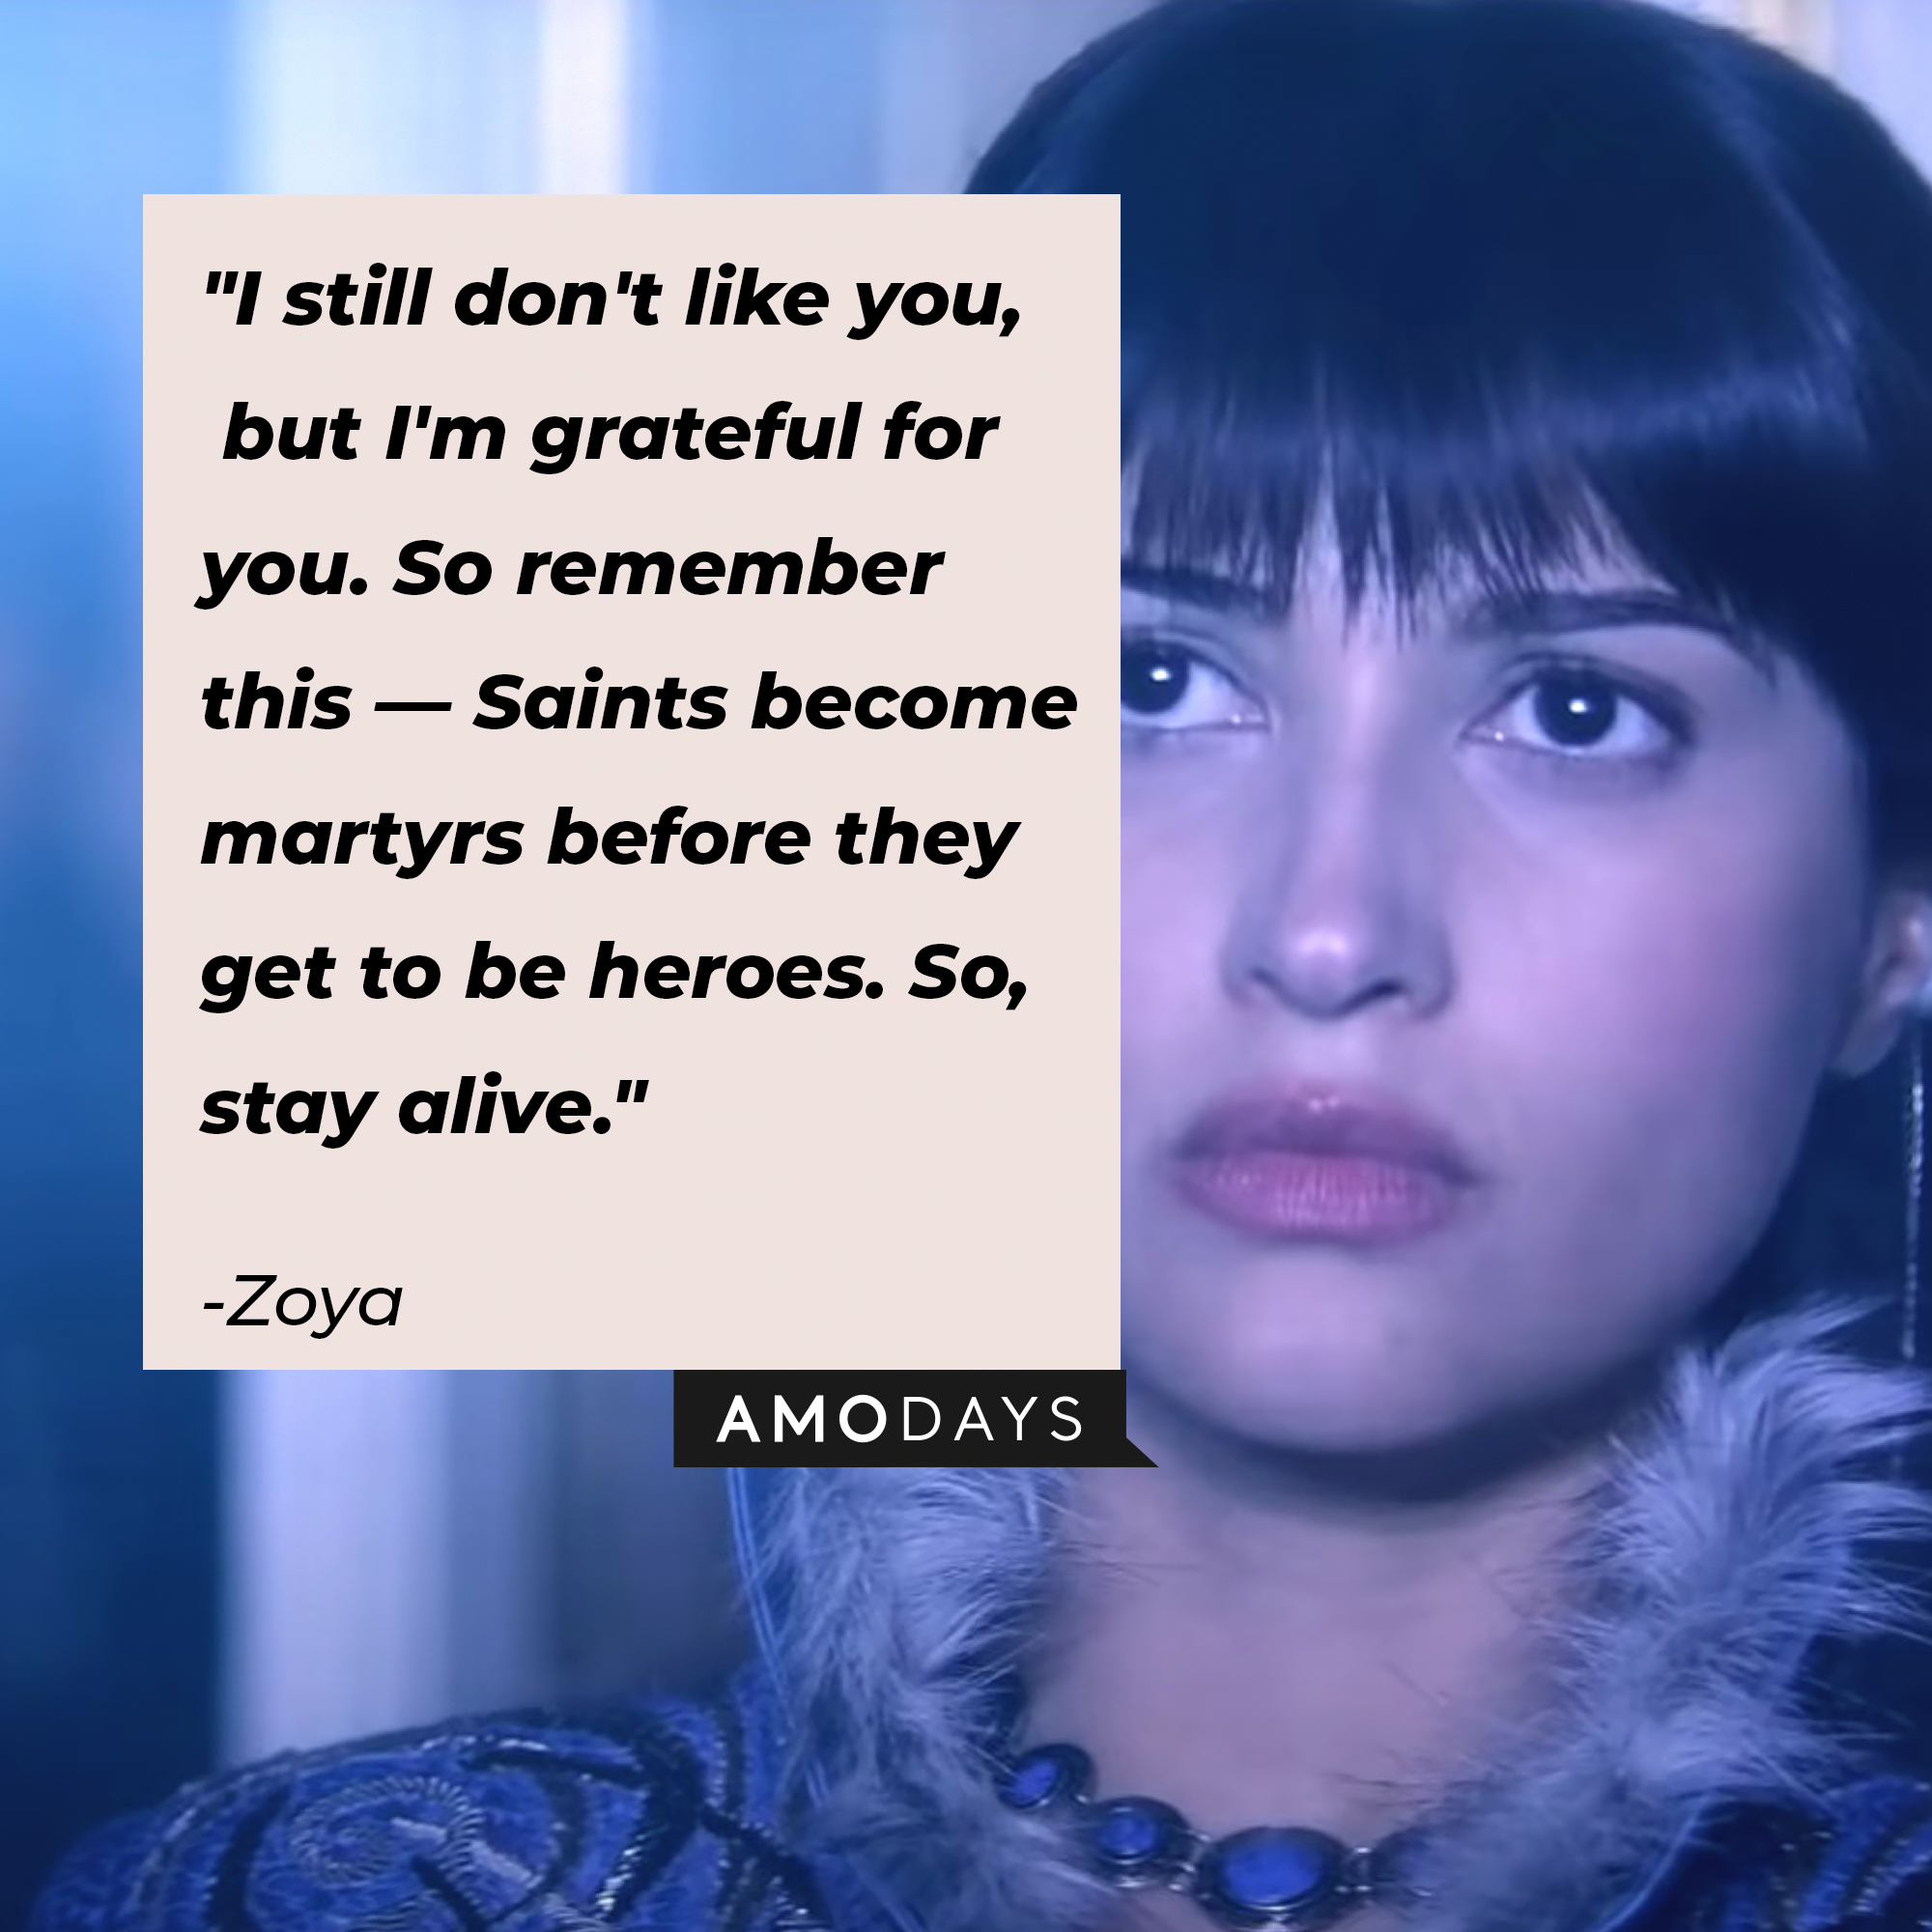 Zoya's quote: "I still don't like you, but I'm grateful for you. So remember this — Saints become martyrs before they get to be heroes. So, stay alive." | Image: AmoDays